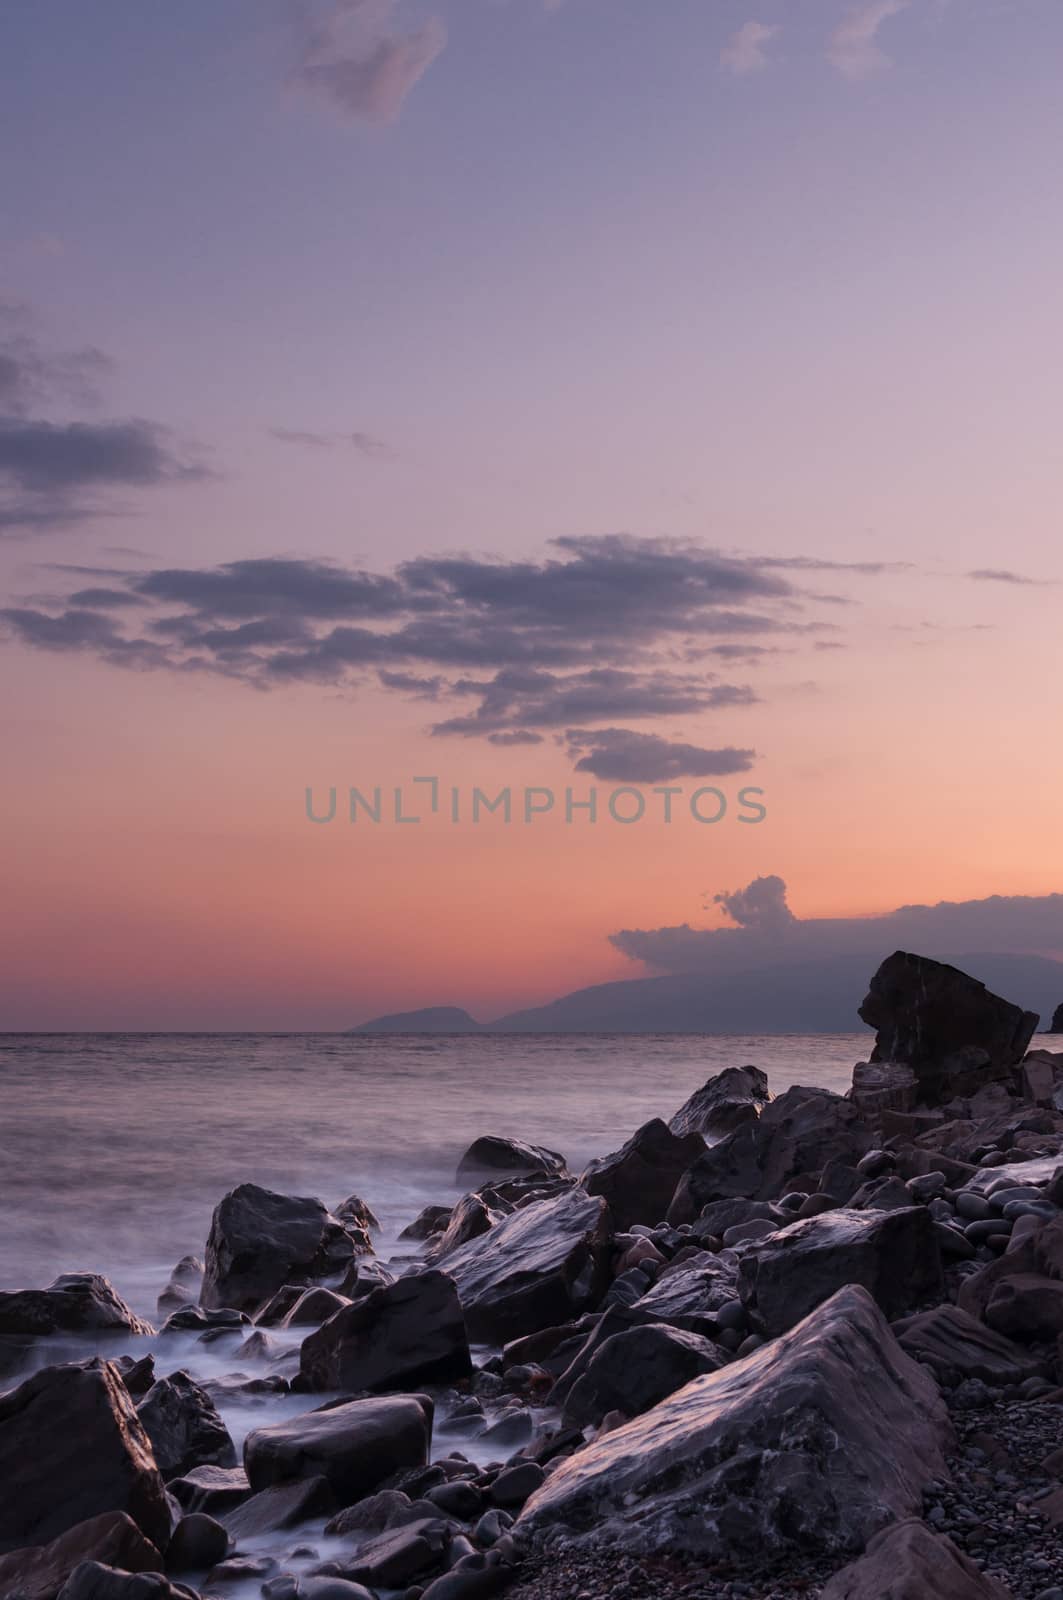 Large boulders on the beach during a beautiful sunset.